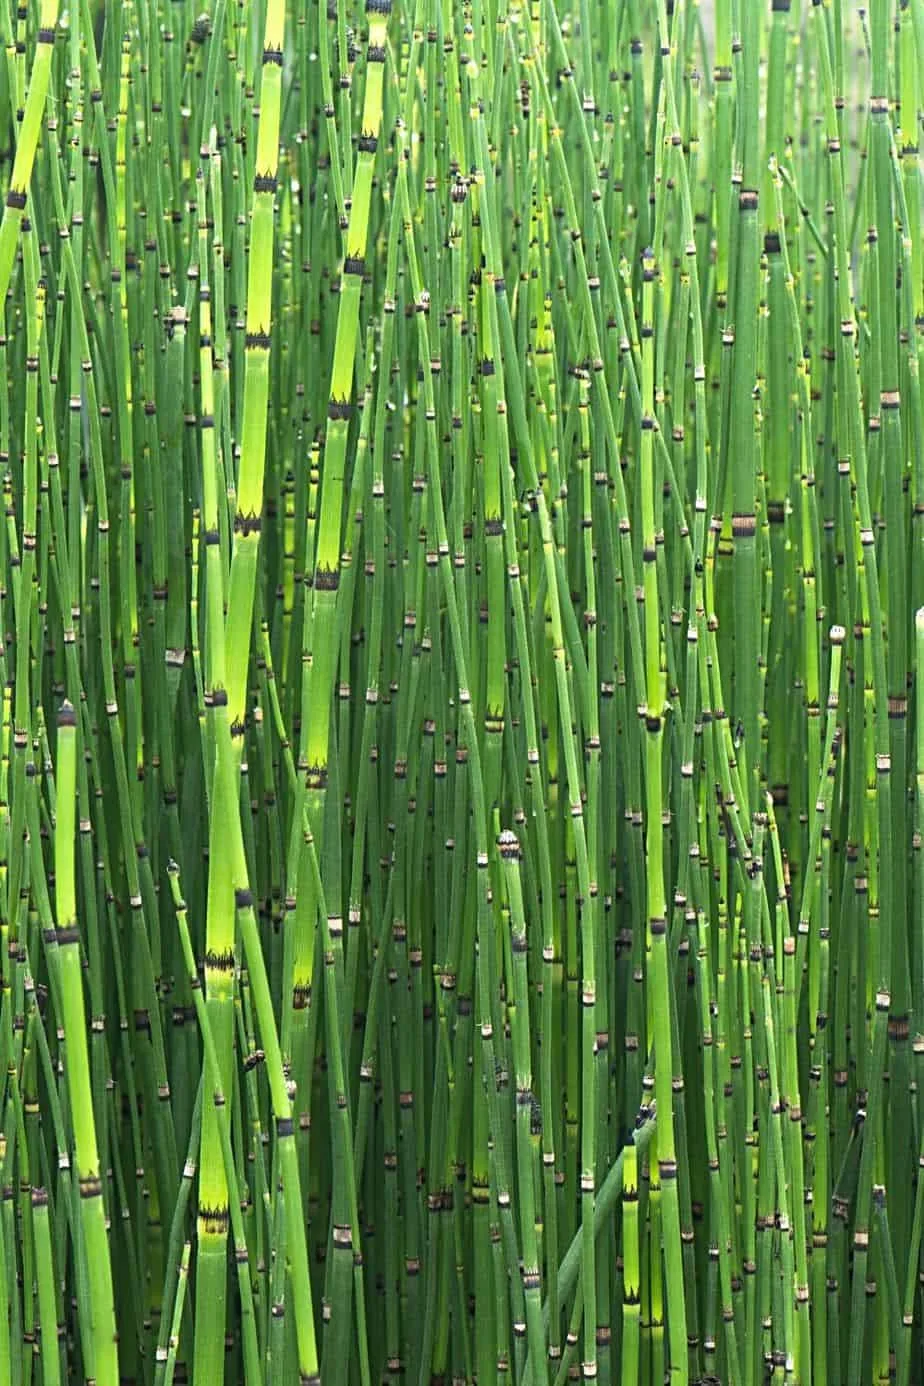 Horsetail, though it's not as attractive as other blooming plants, is another great plant to grow for privacy